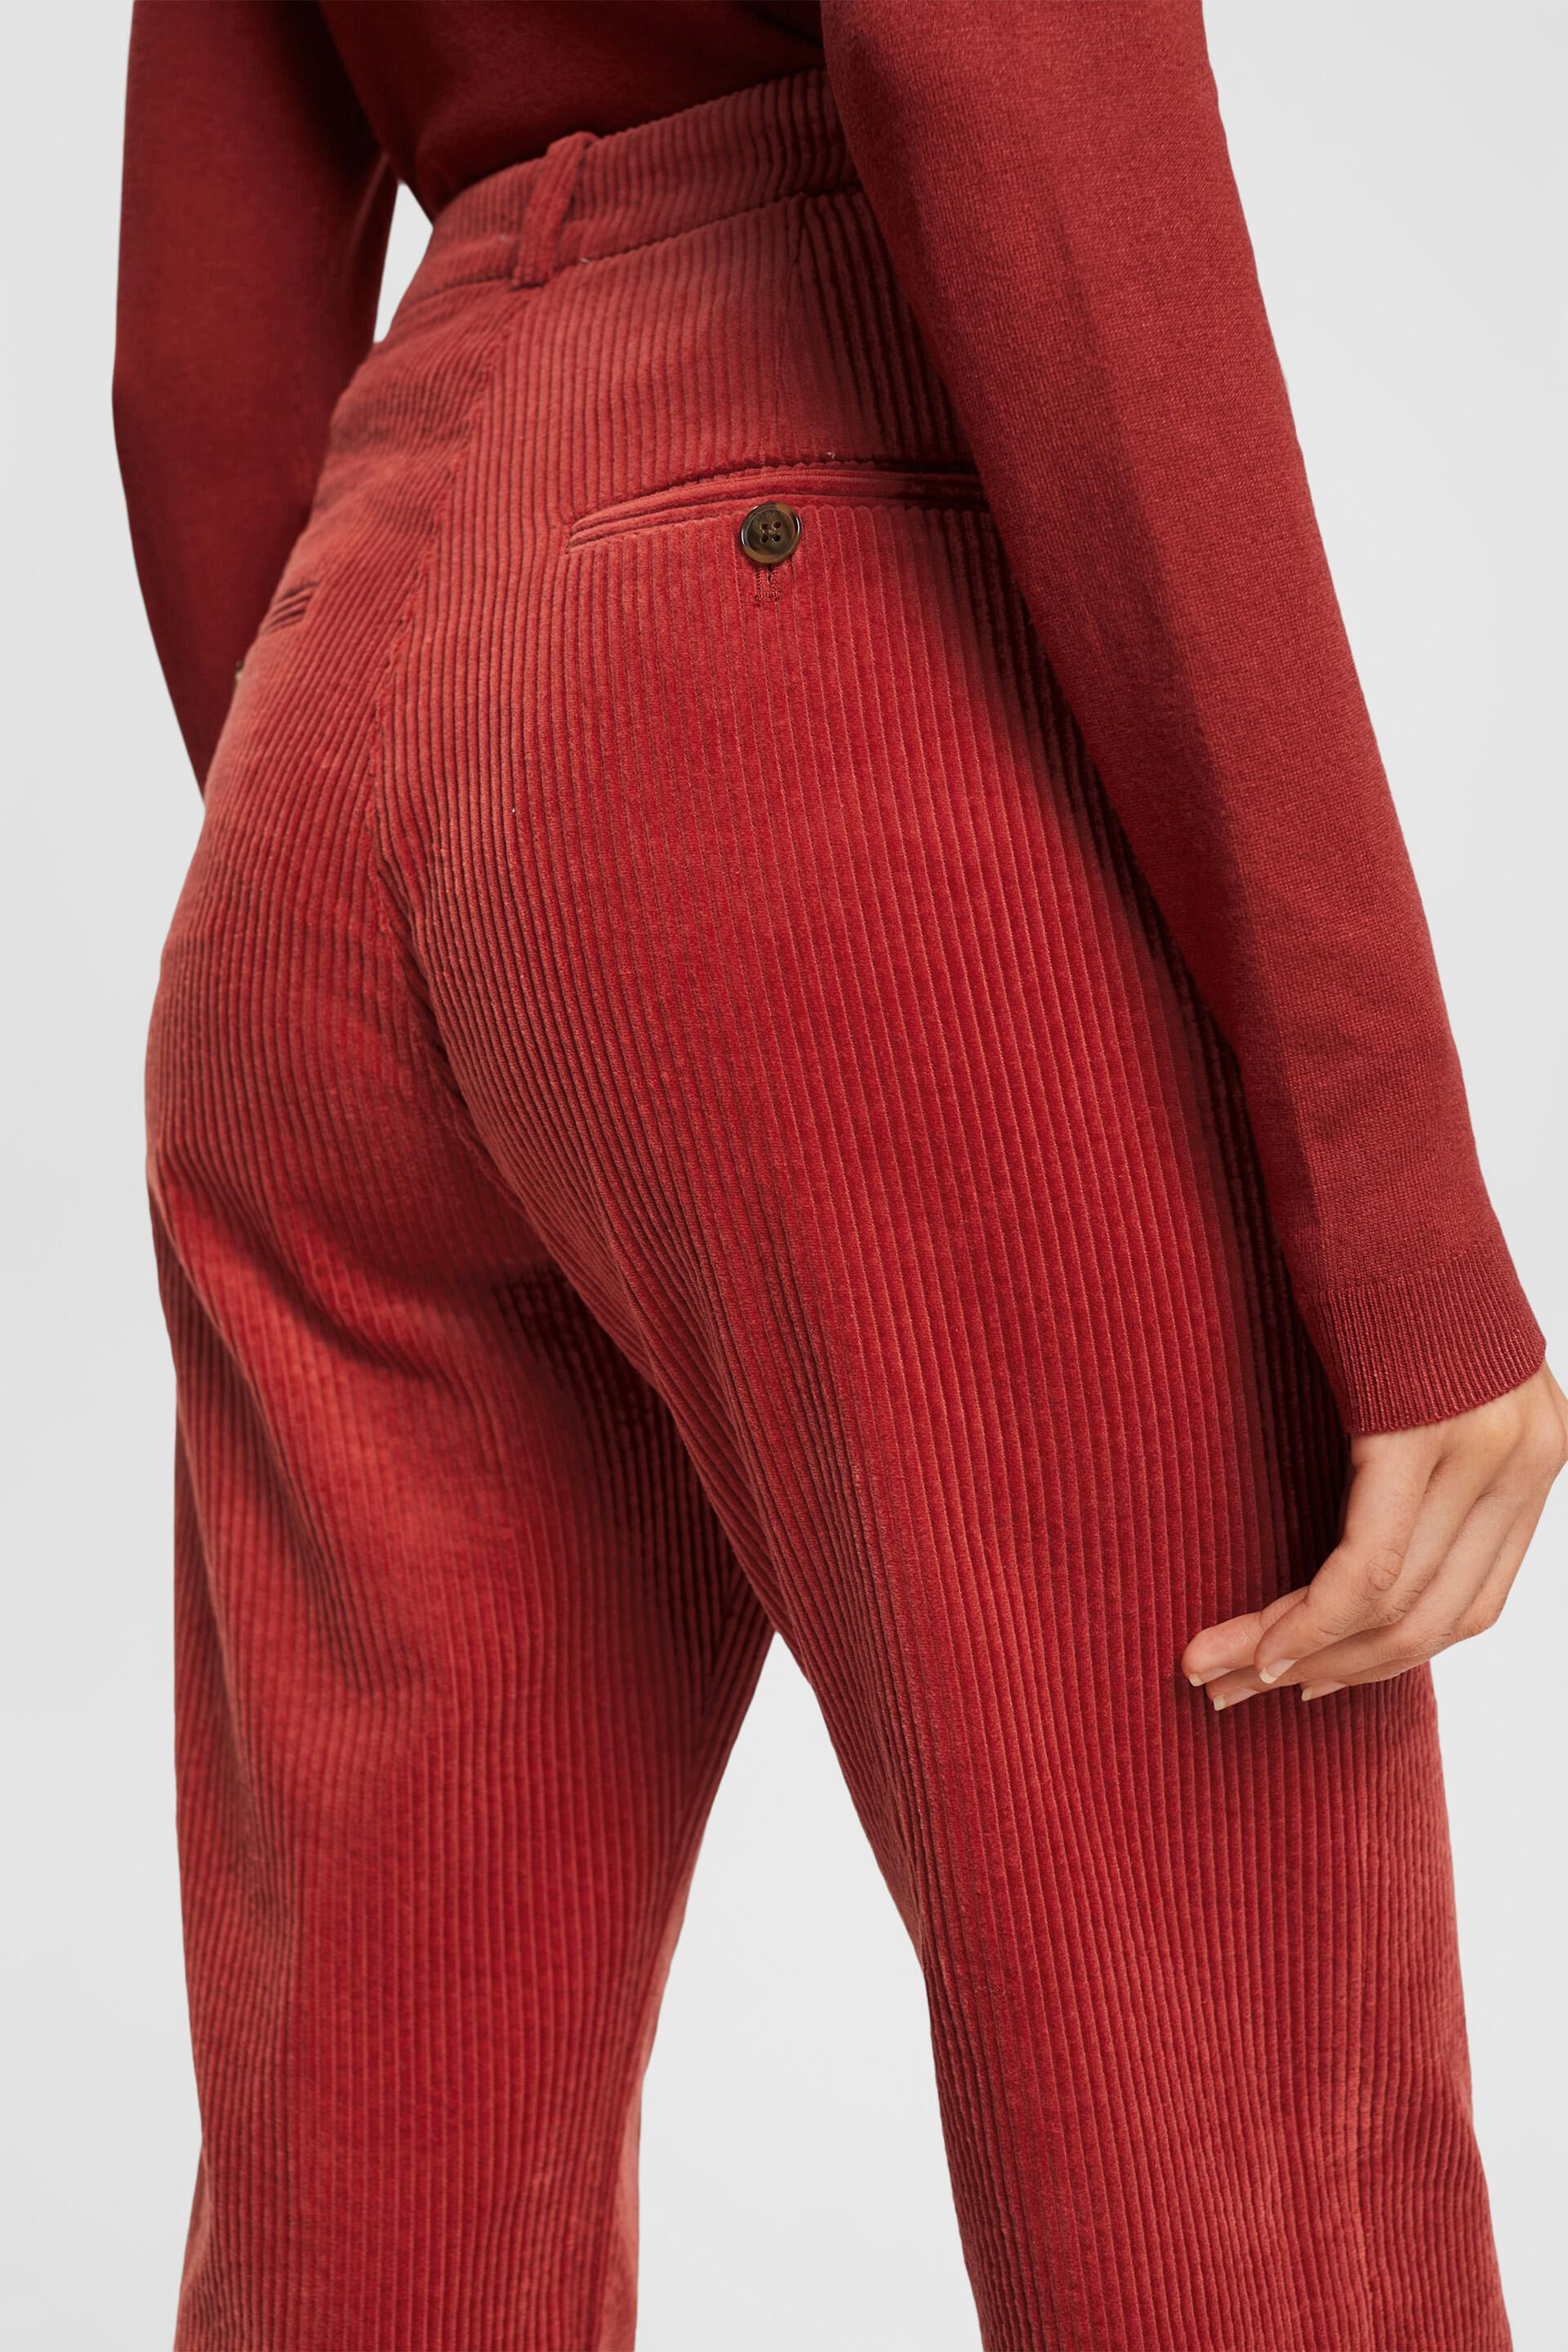 Camille Rowe Livin  Corduroy Trousers for Women  RVCA